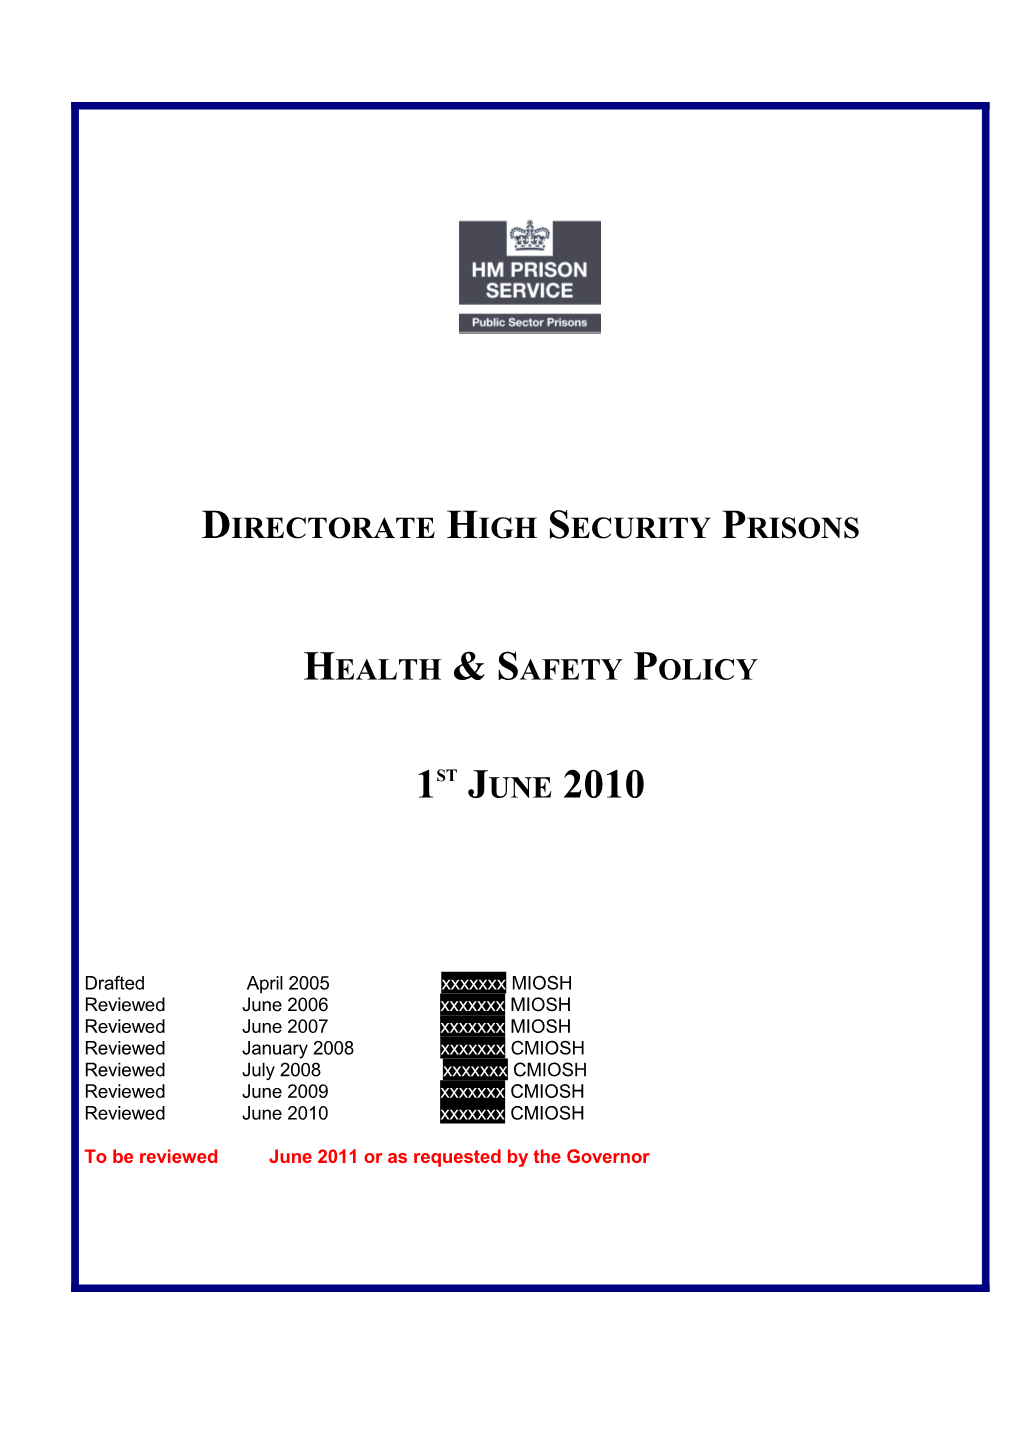 Statement of Intent -Head of High Security Prisons